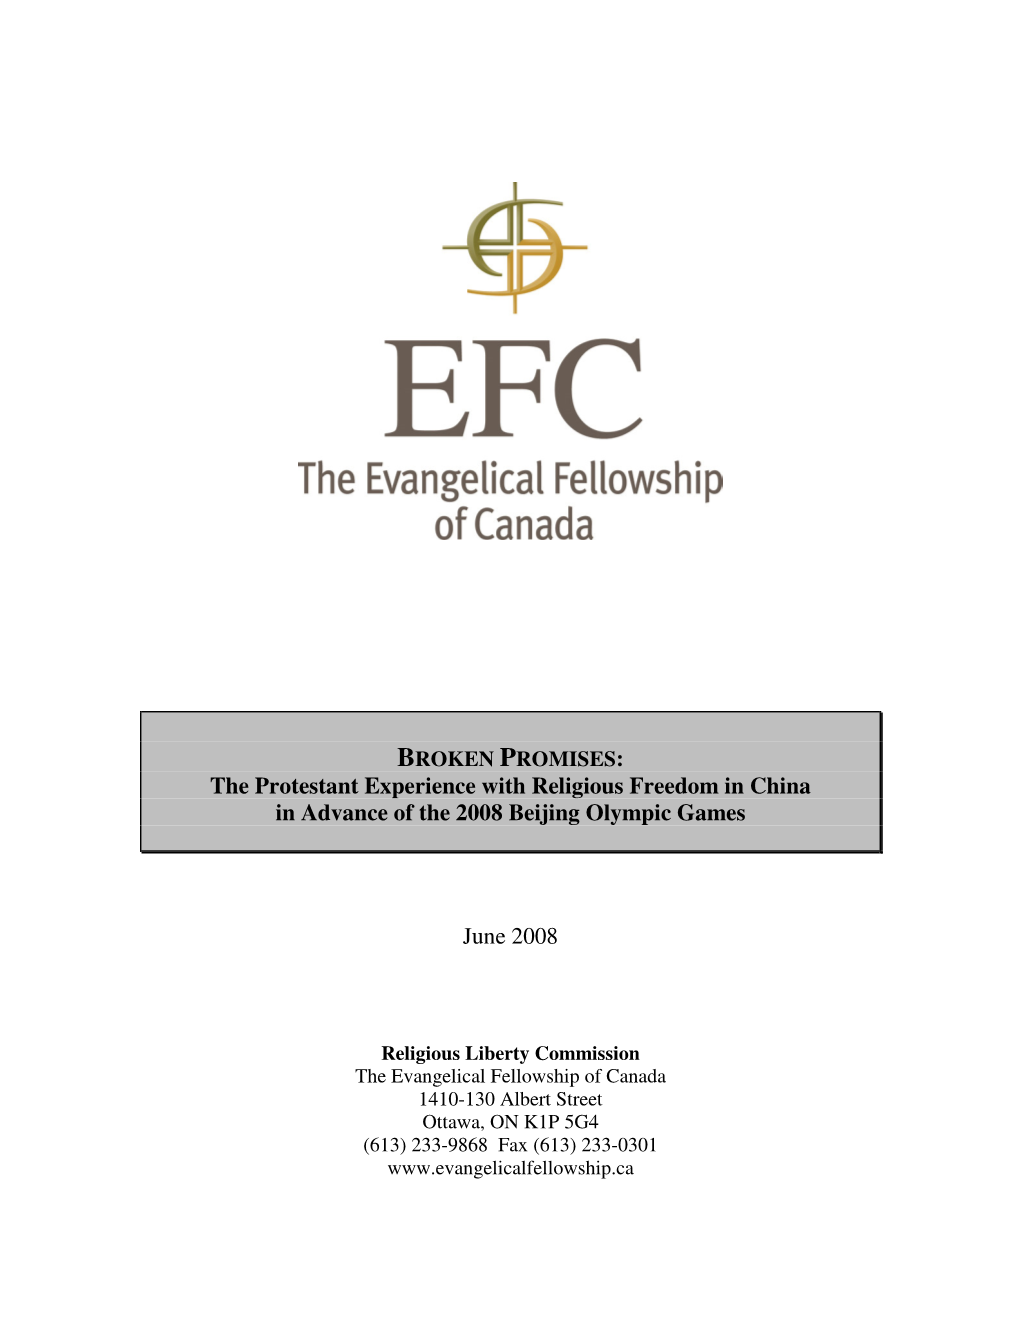 The Protestant Experience with Religious Freedom in China in Advance of the 2008 Beijing Olympic Games